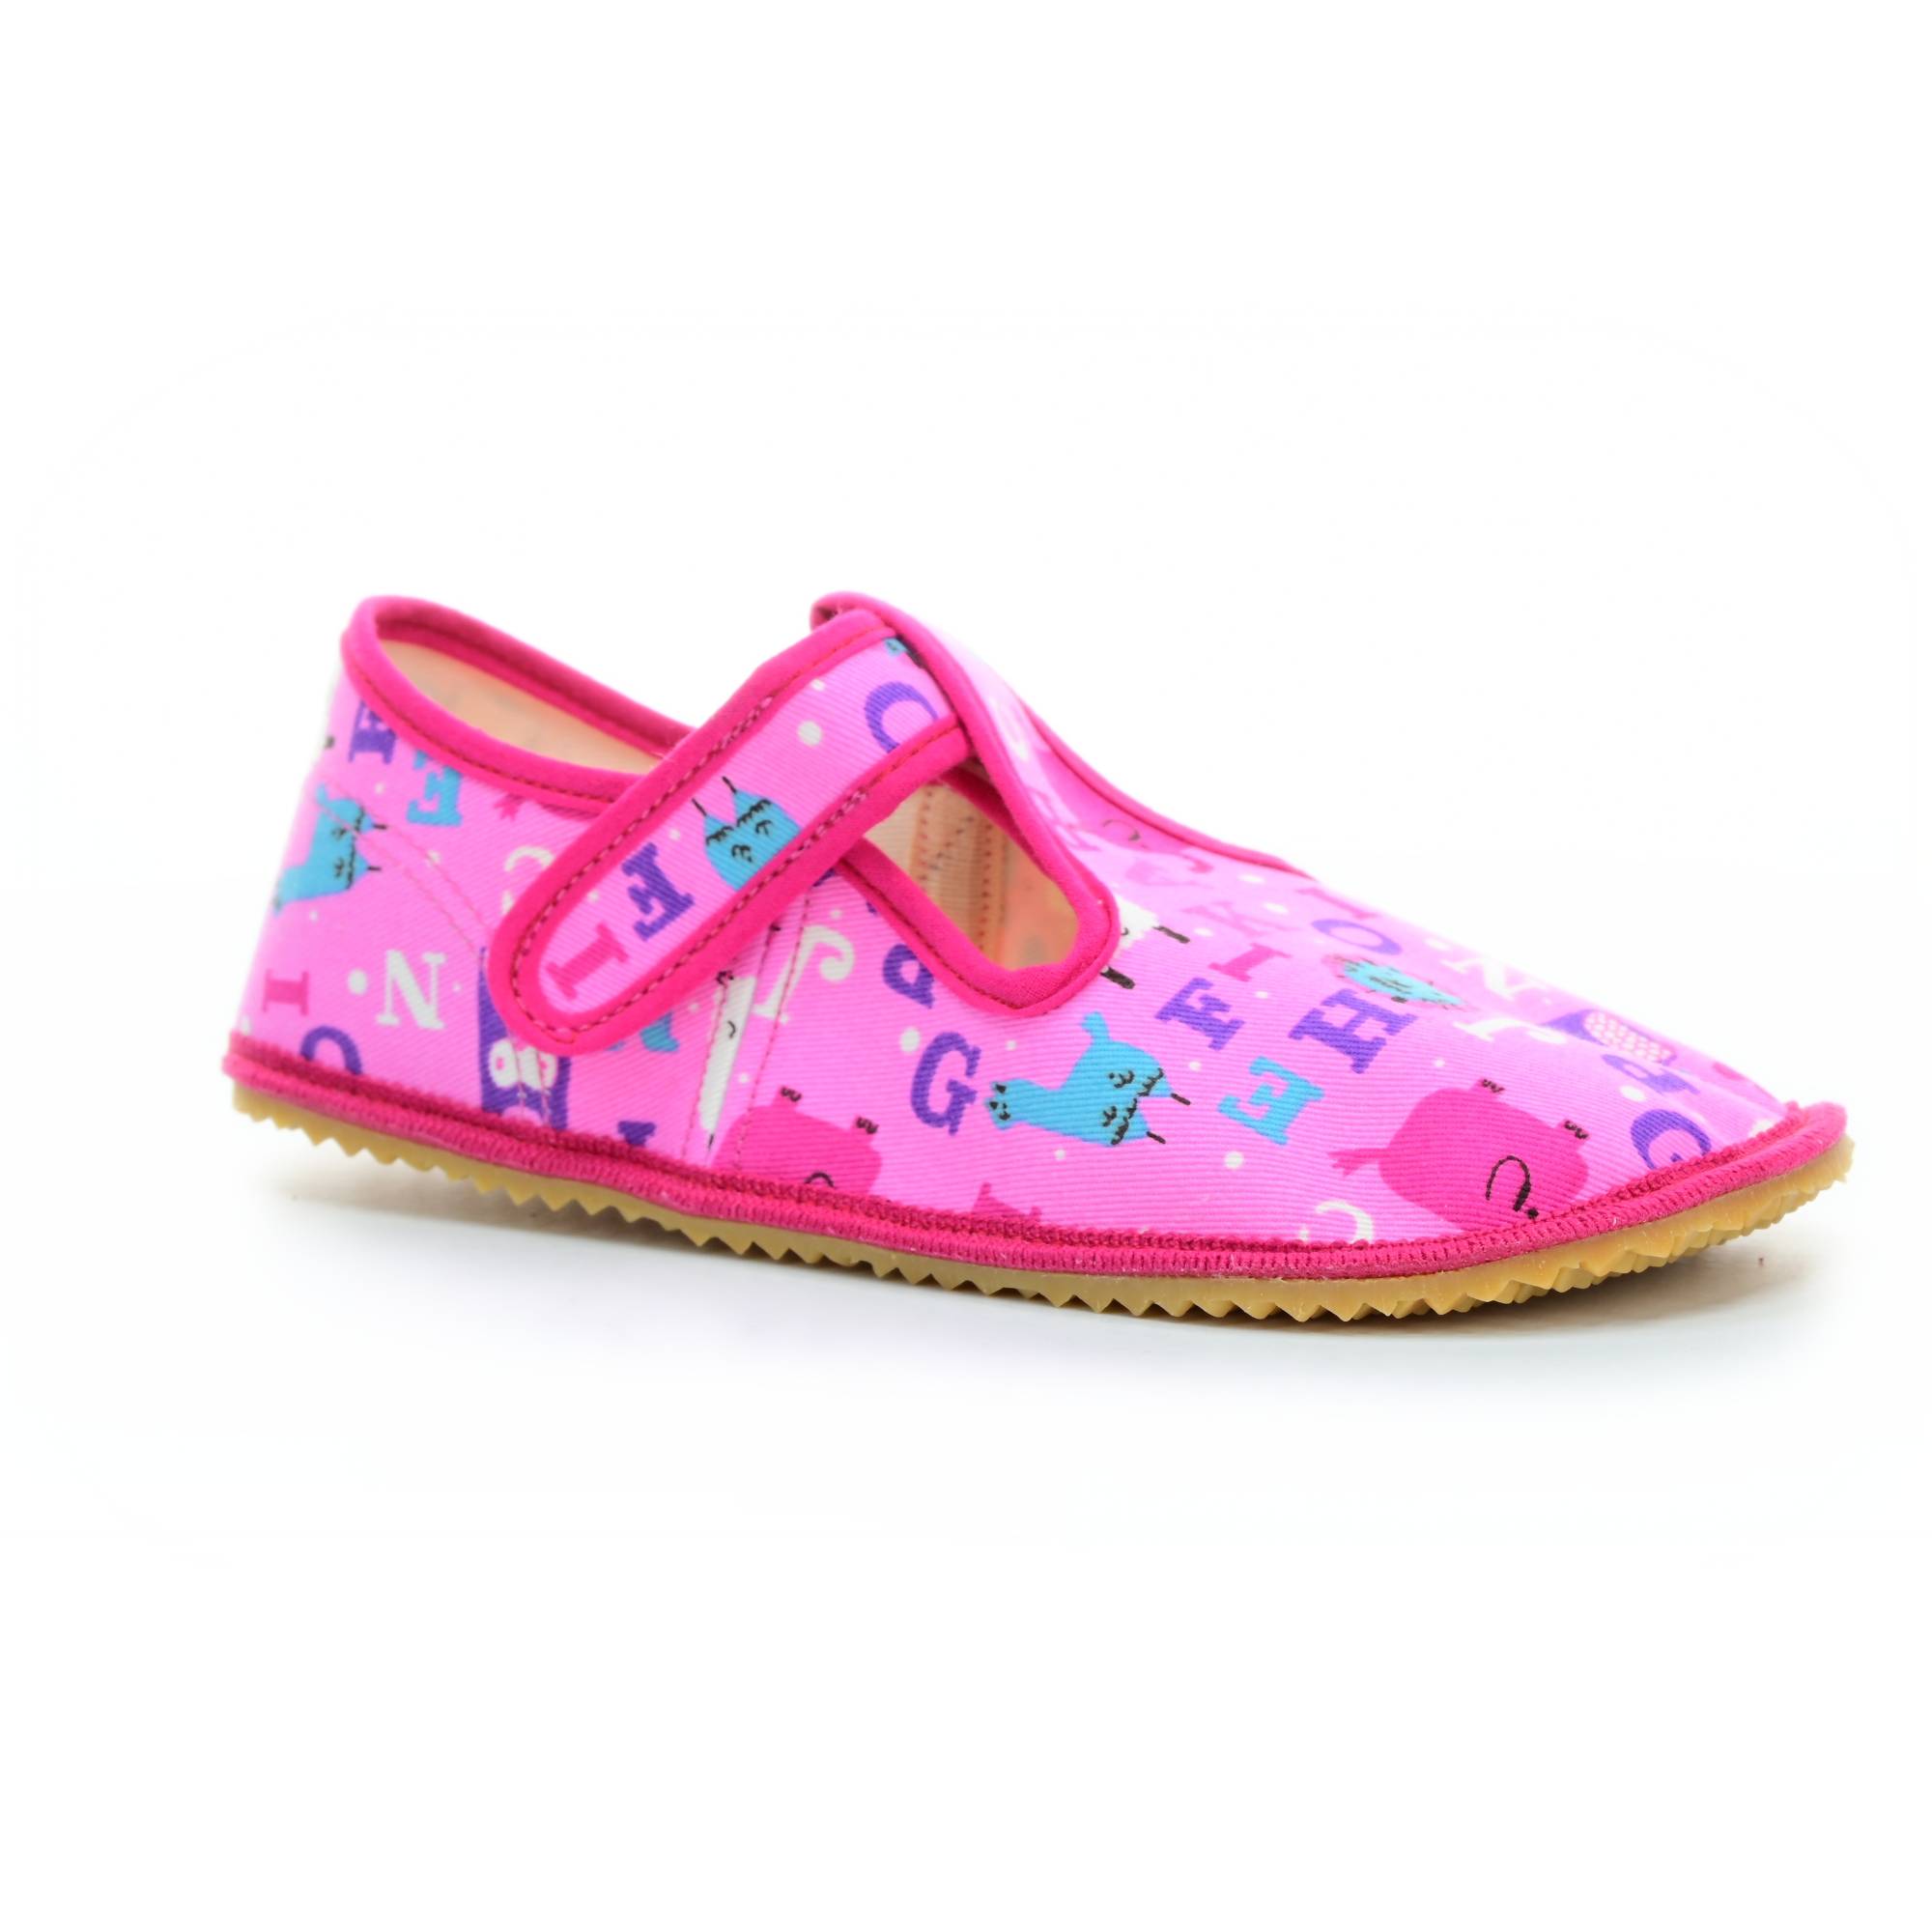 slippers Beda pink letter (BF-060010/W) | www.footic.com